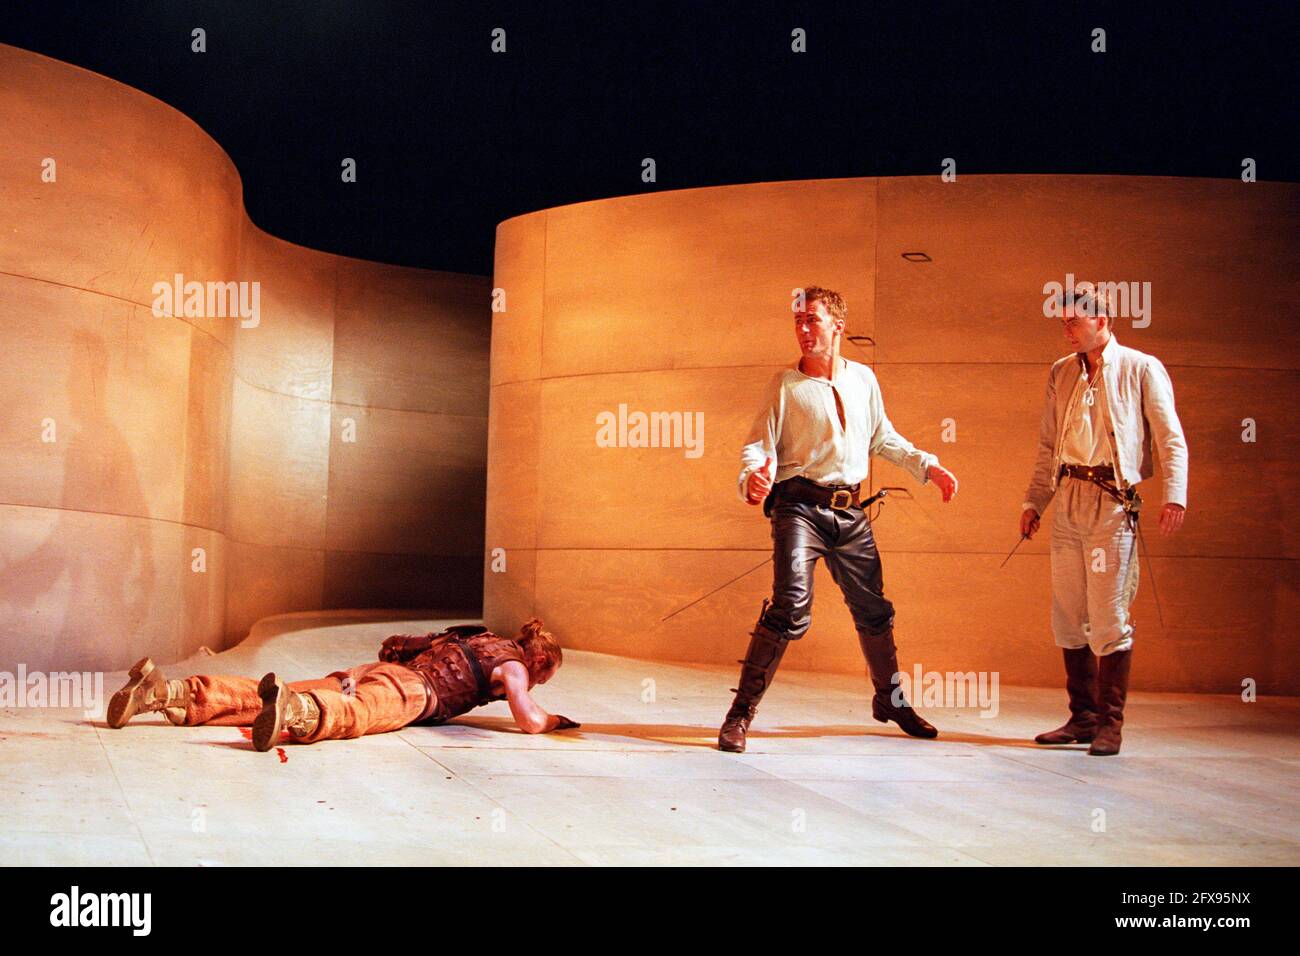 l-r: Keith Dunphy (Tybalt), Anthony Howell (Benvolio), David Tennant (Romeo) in ROMEO AND JULIET by Shakespeare at the Royal Shakespeare Company (RSC), Royal Shakespeare Theatre, Stratford-upon-Avon  05/07/2000  music: Stephen Warbeck  design: Tom Piper  lighting: Chris Davey  fights: Terry King  movement: Liz Ranken  director: Michael Boyd Stock Photo